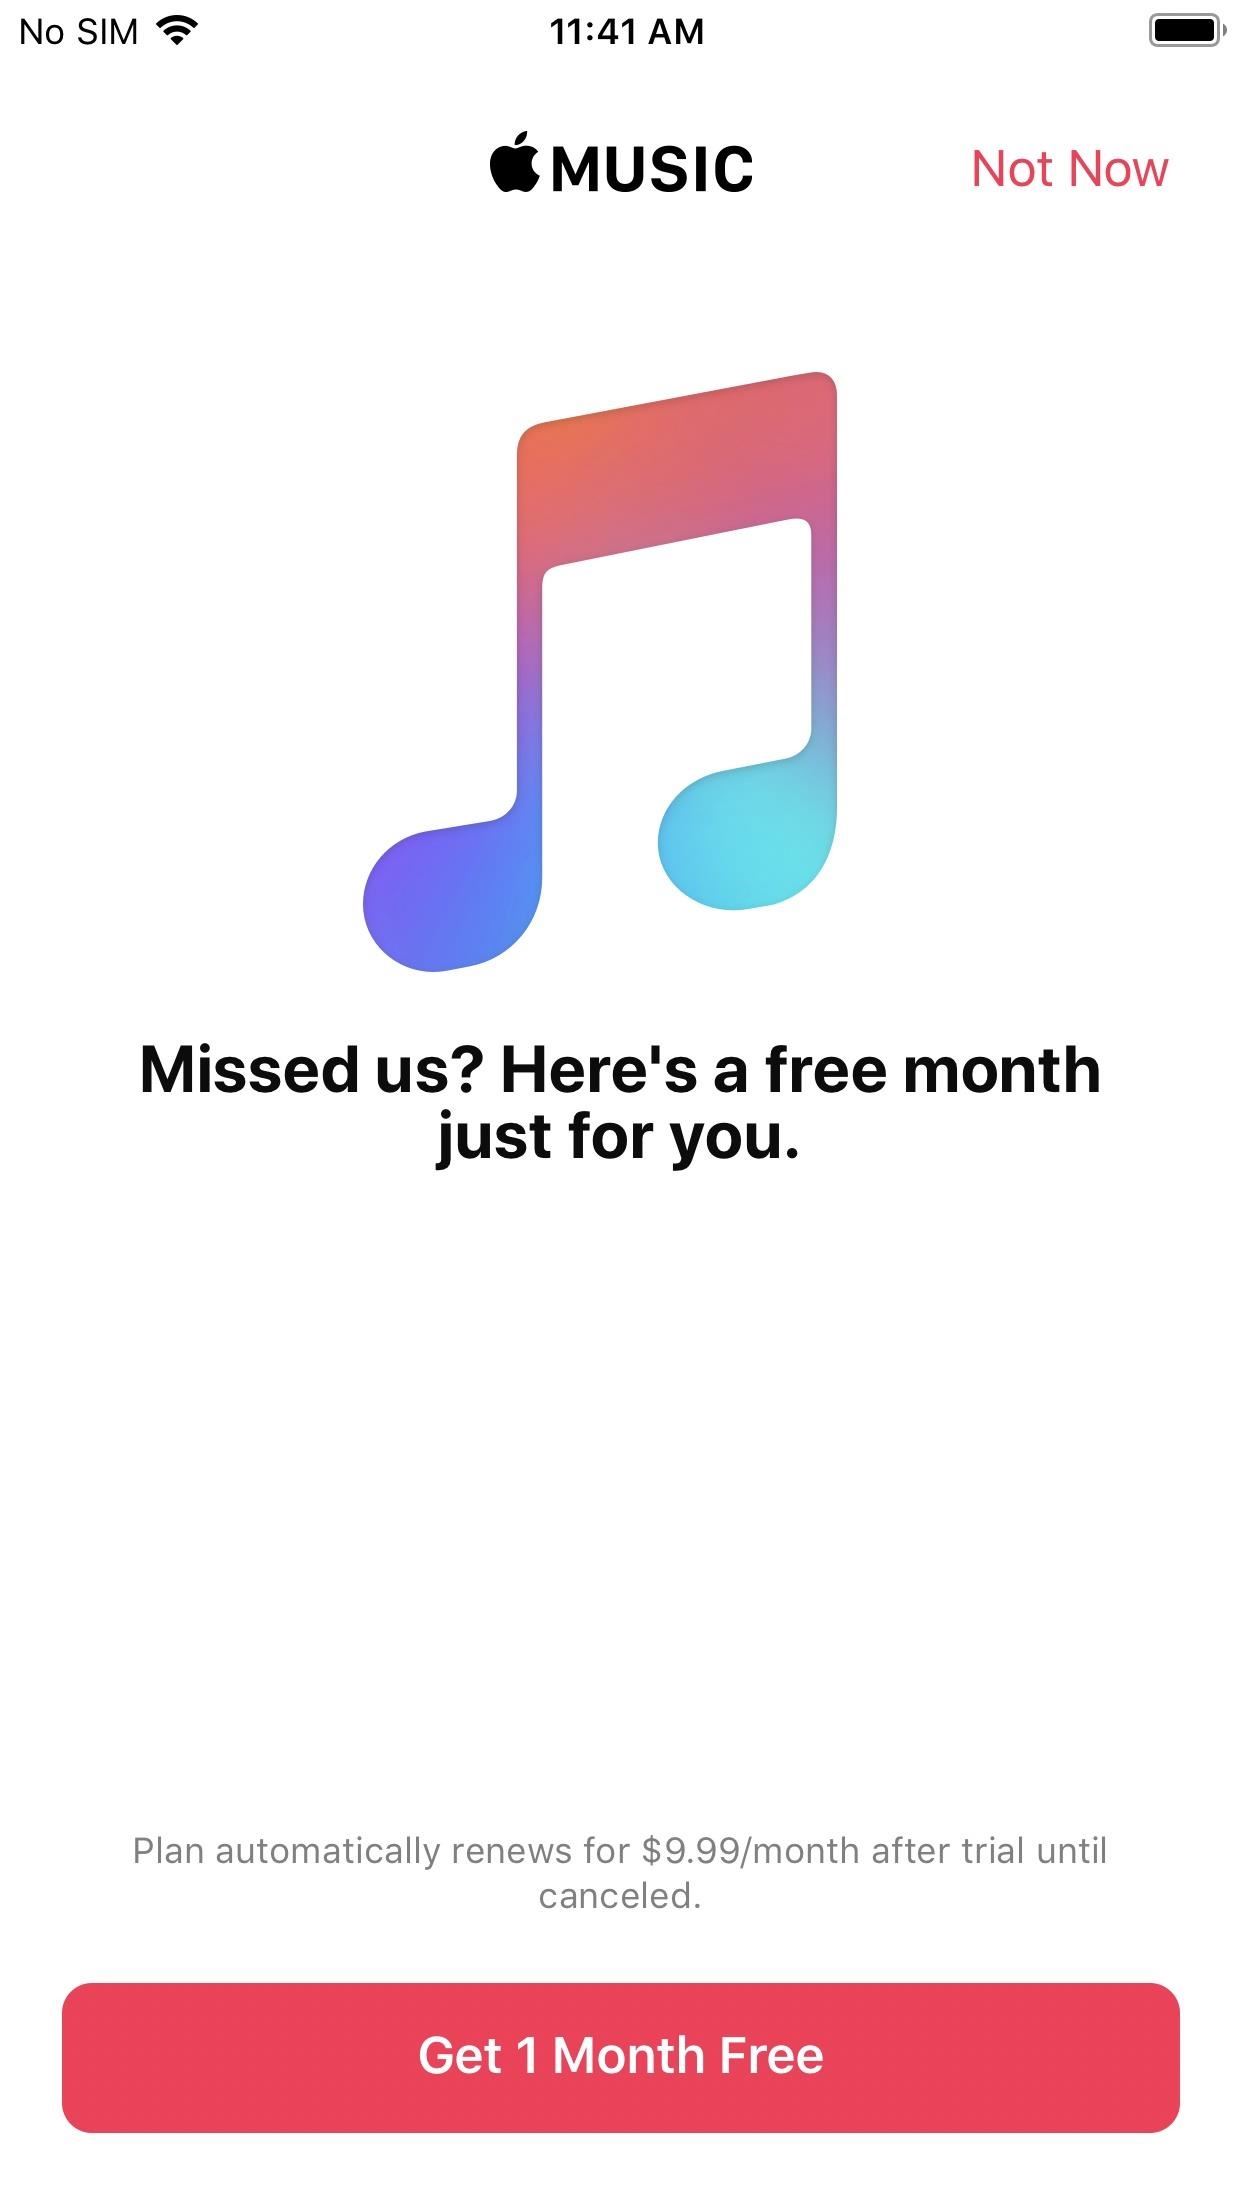 How to Disable Apple Music's Auto-Renewal for Free Trials So You Don't Get Charged